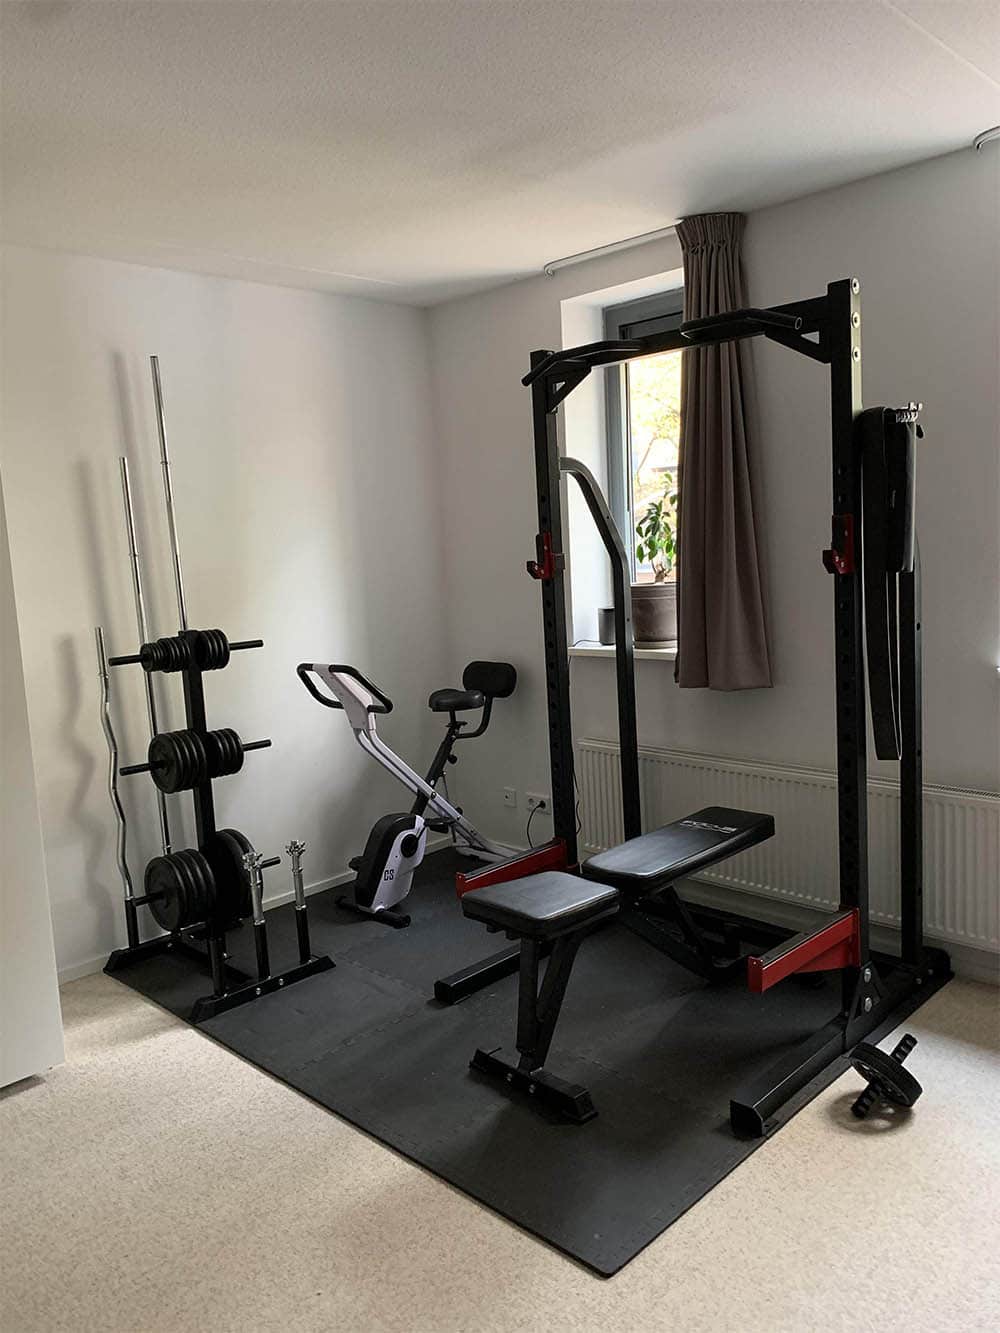 Small Bedroom Gym Ideas